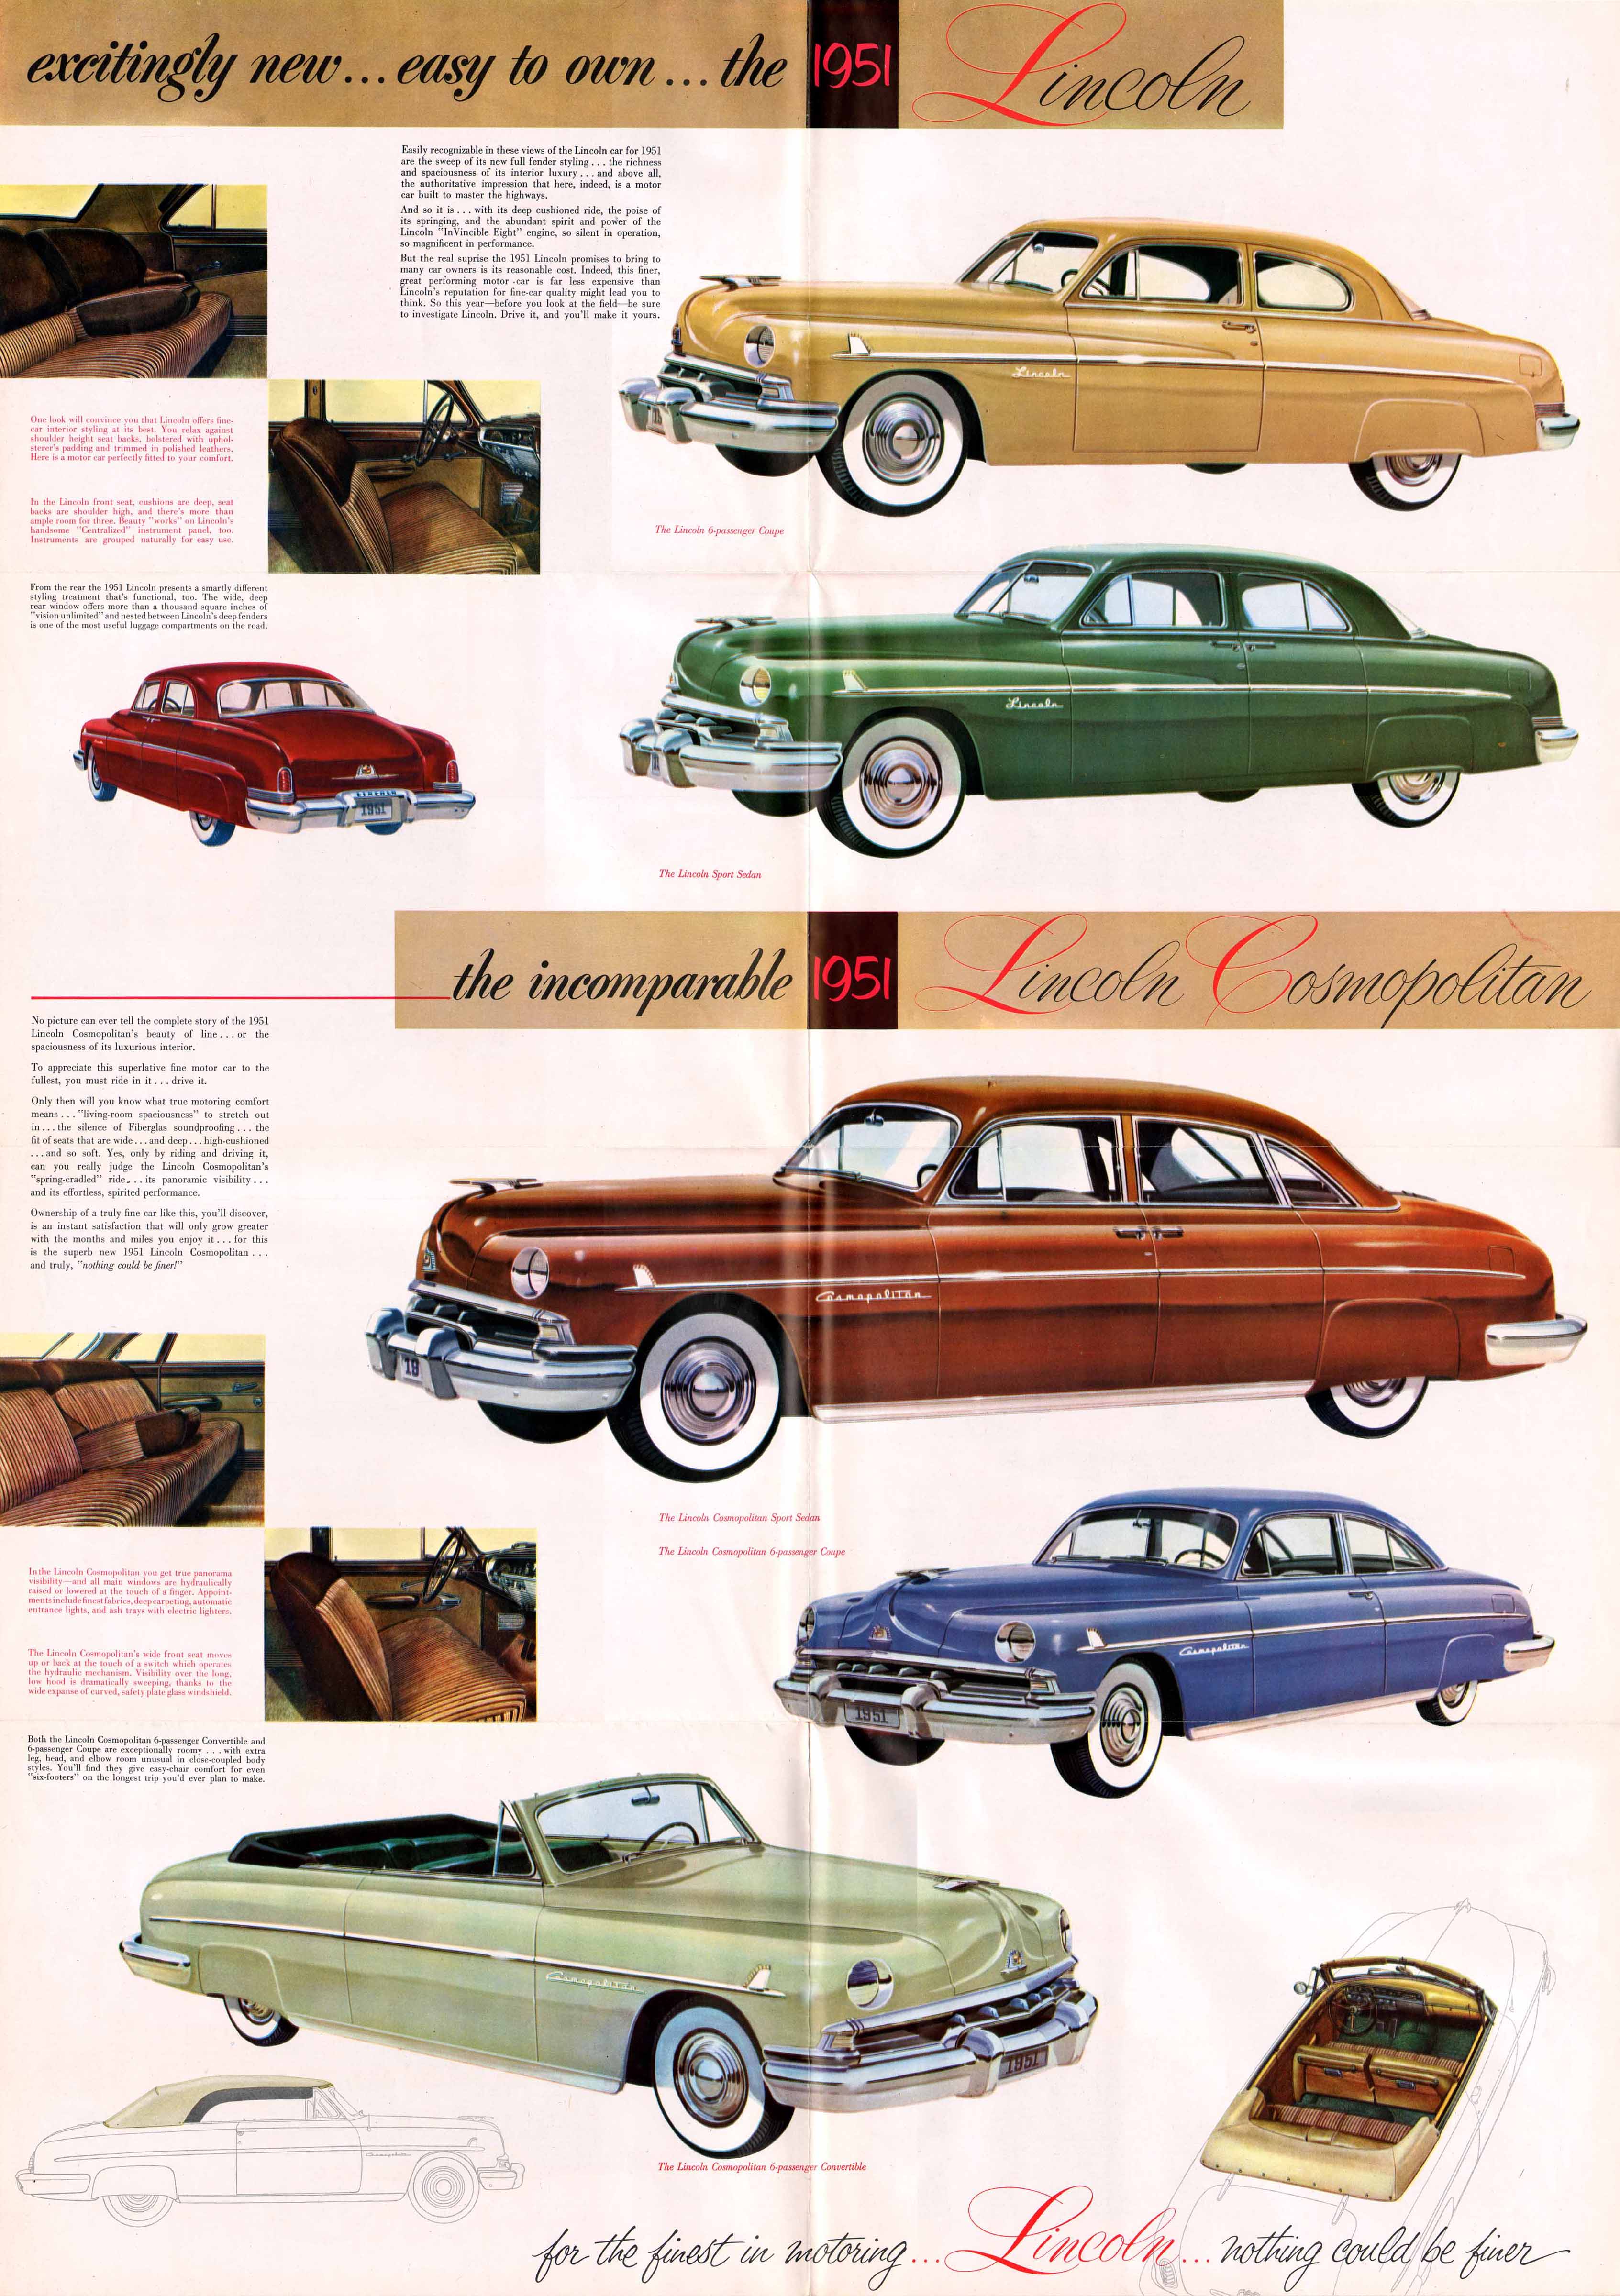 1951 Lincoln Foldout Page 3